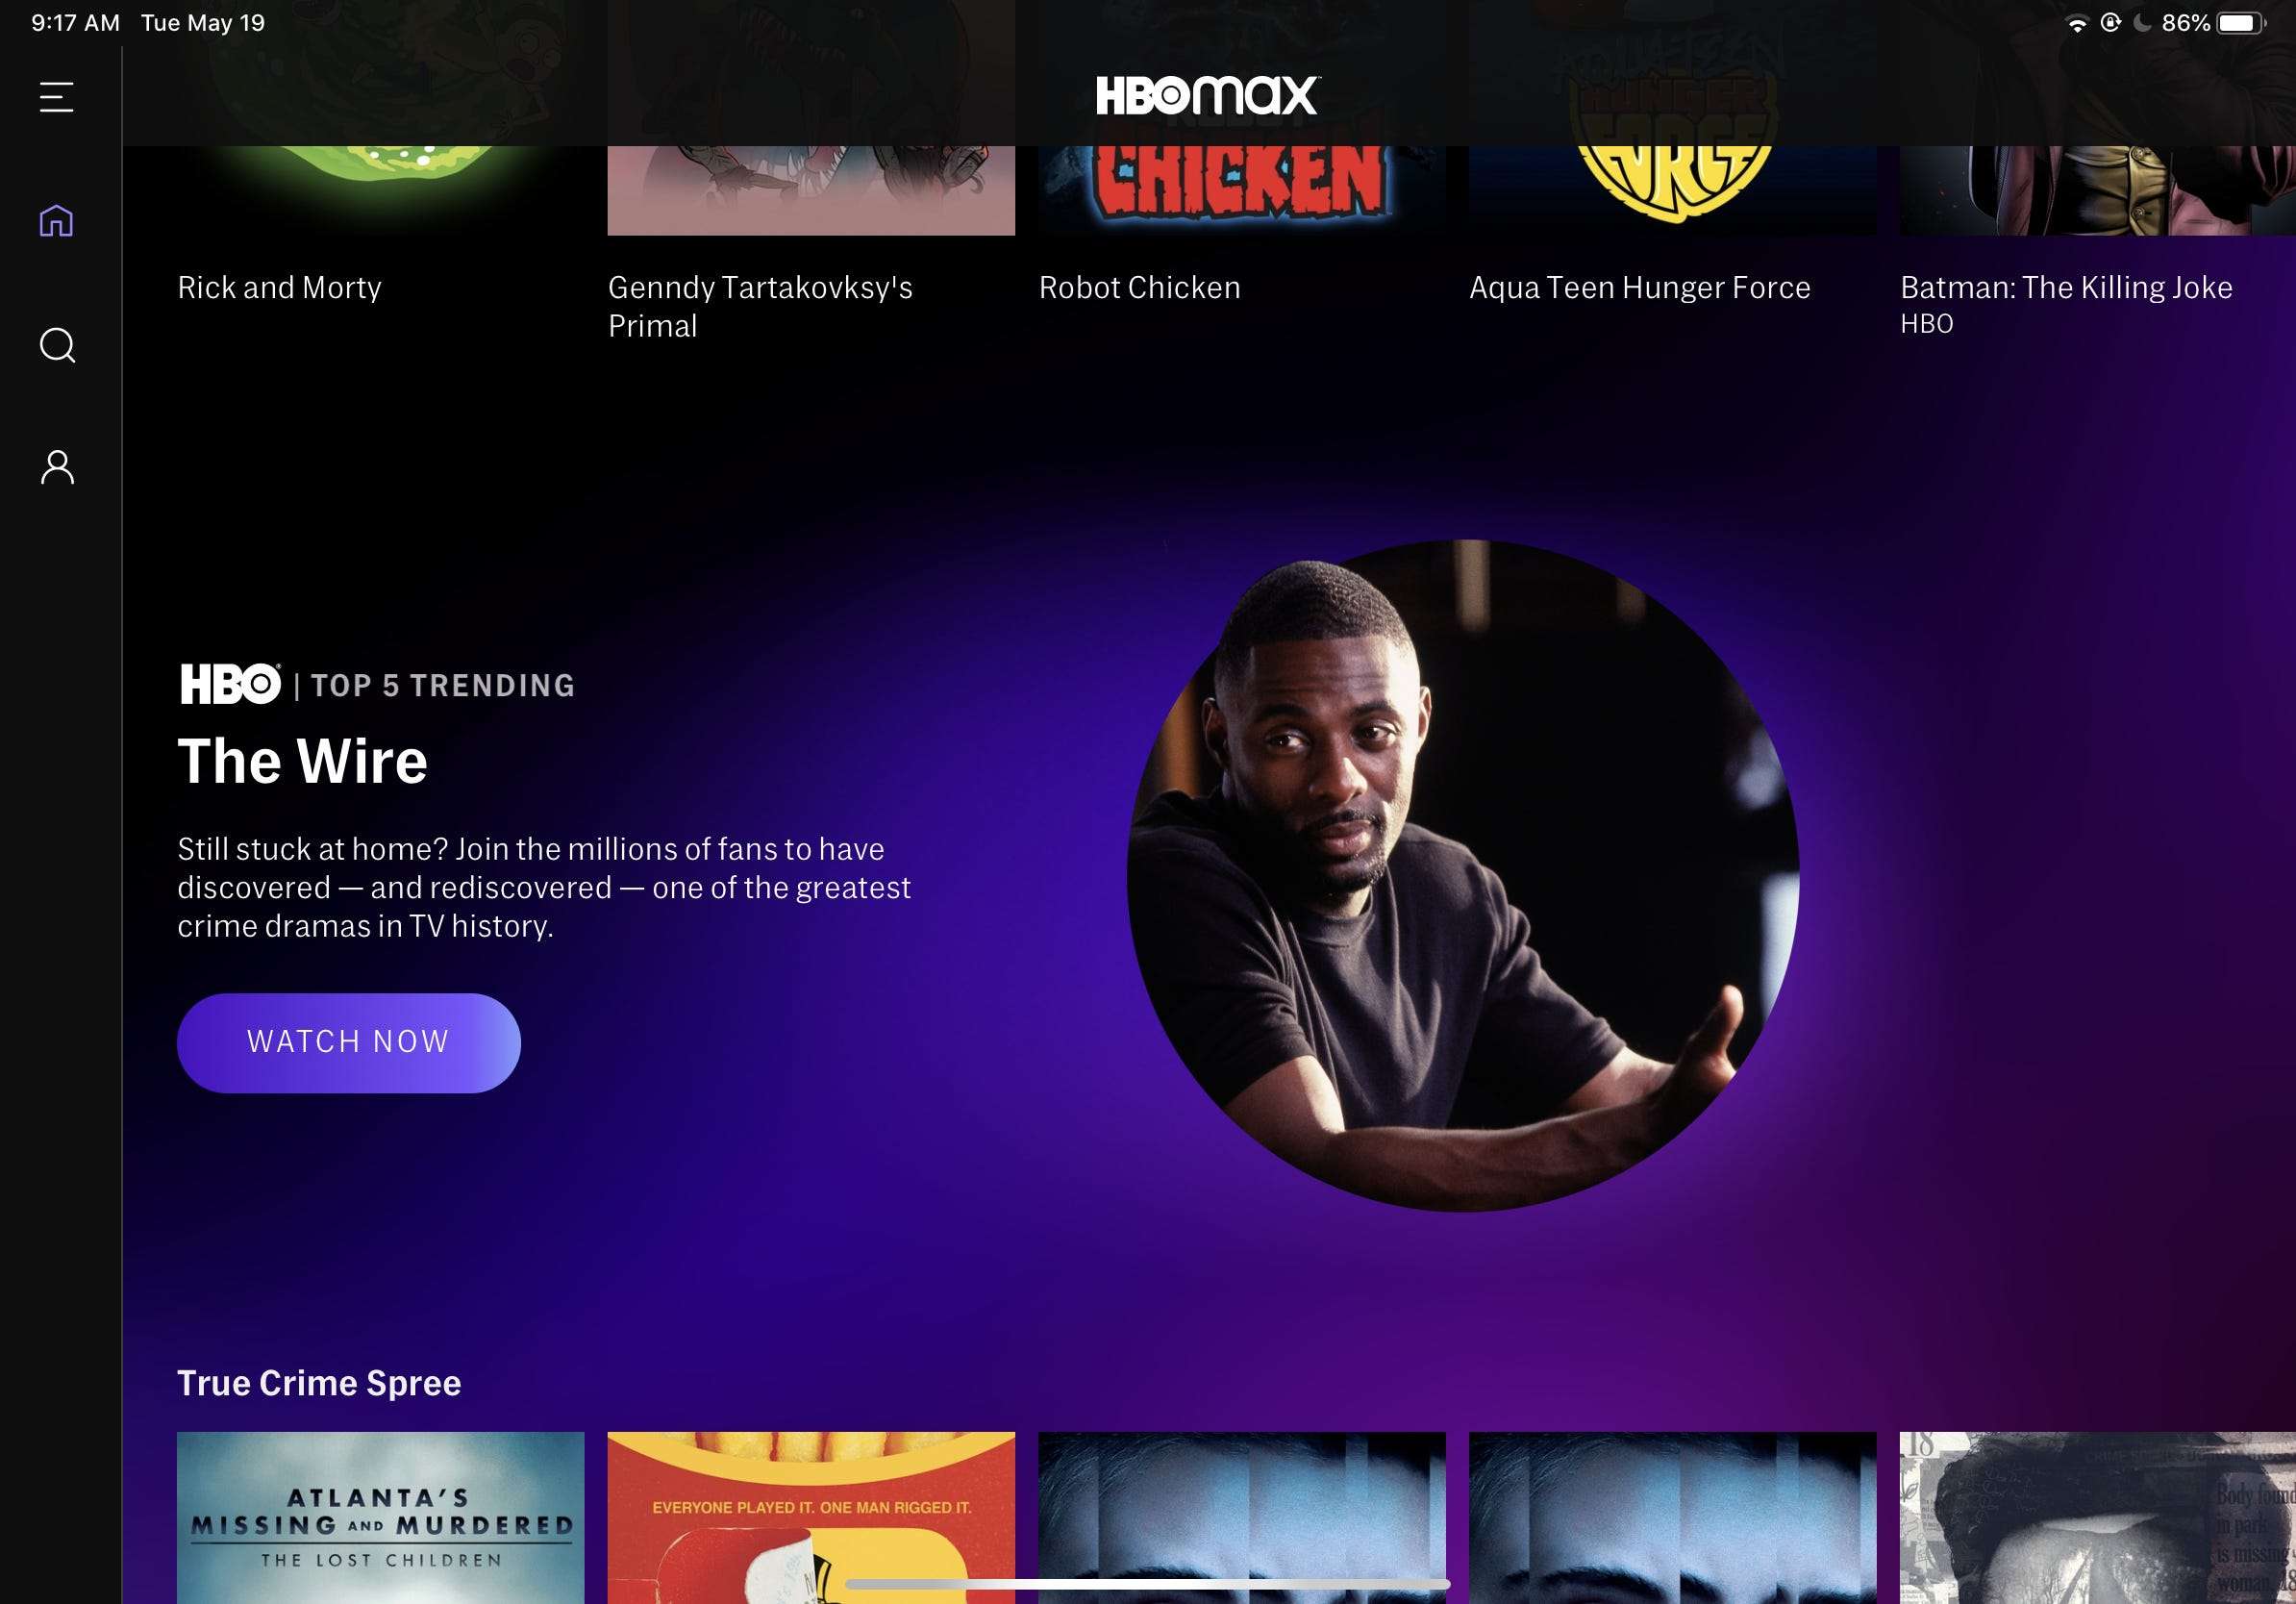 HBO Max is an expansion of the HBO streaming service you already use